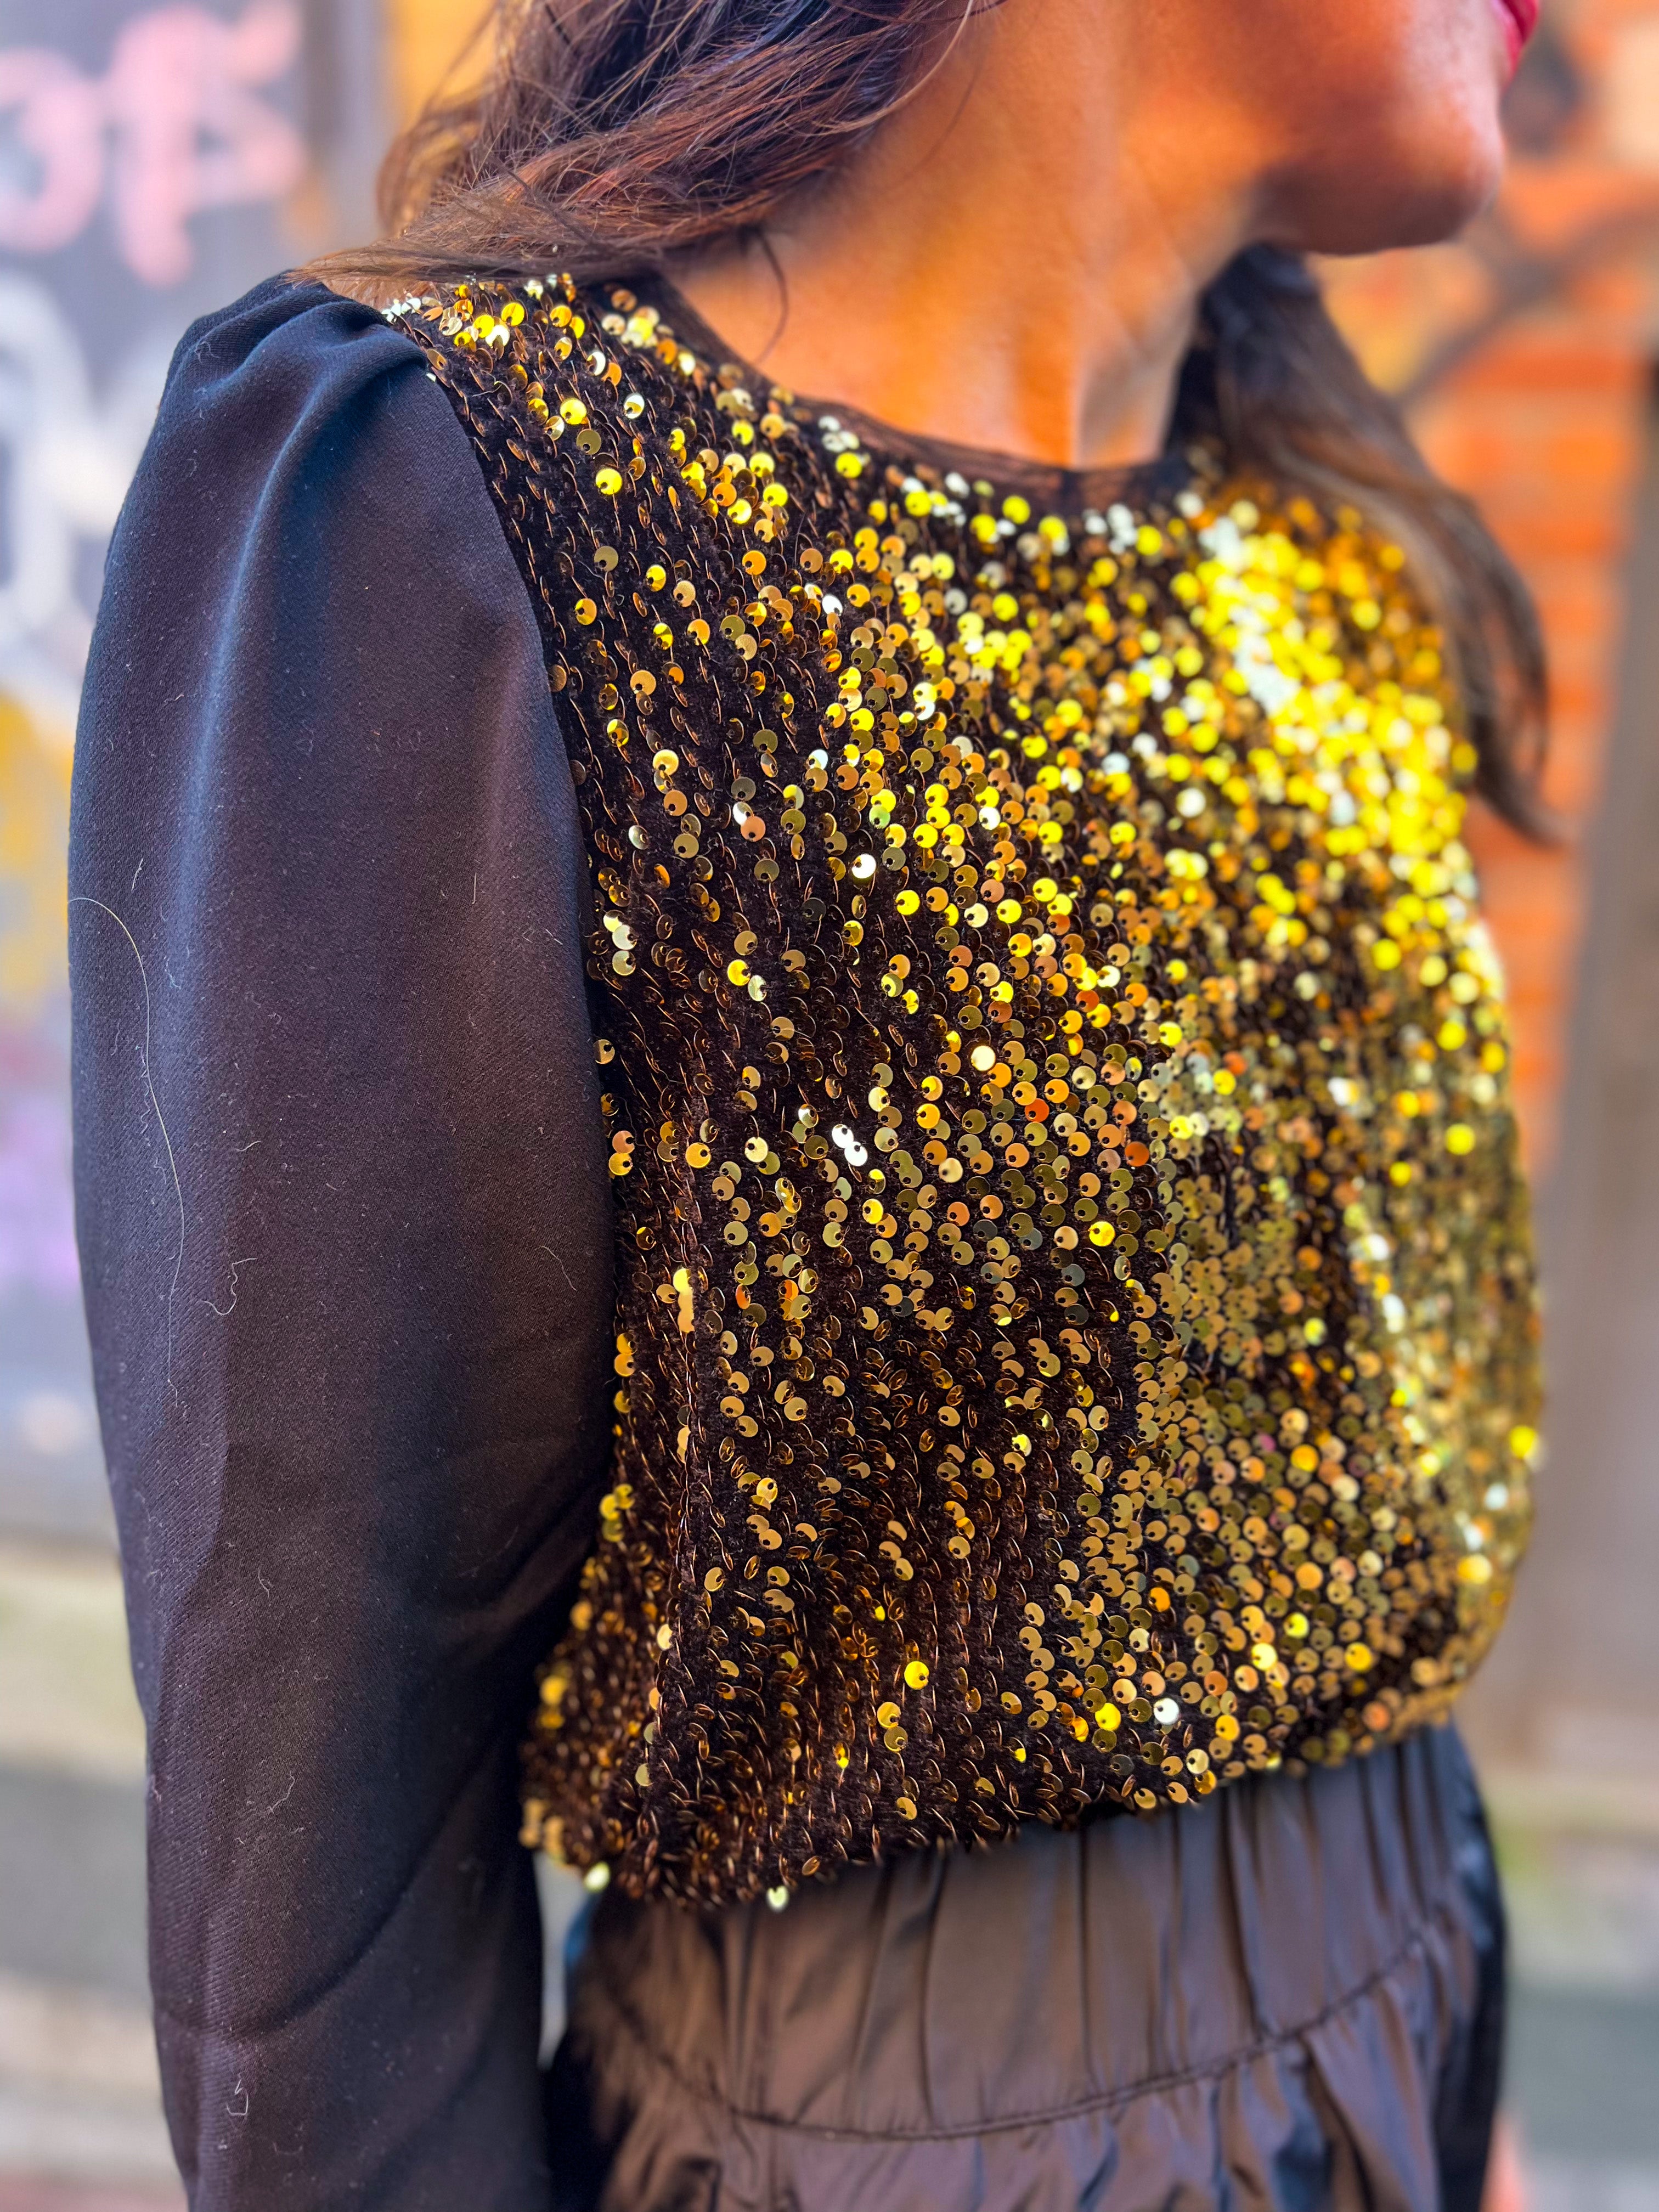 The ‘Goldie’ blouse